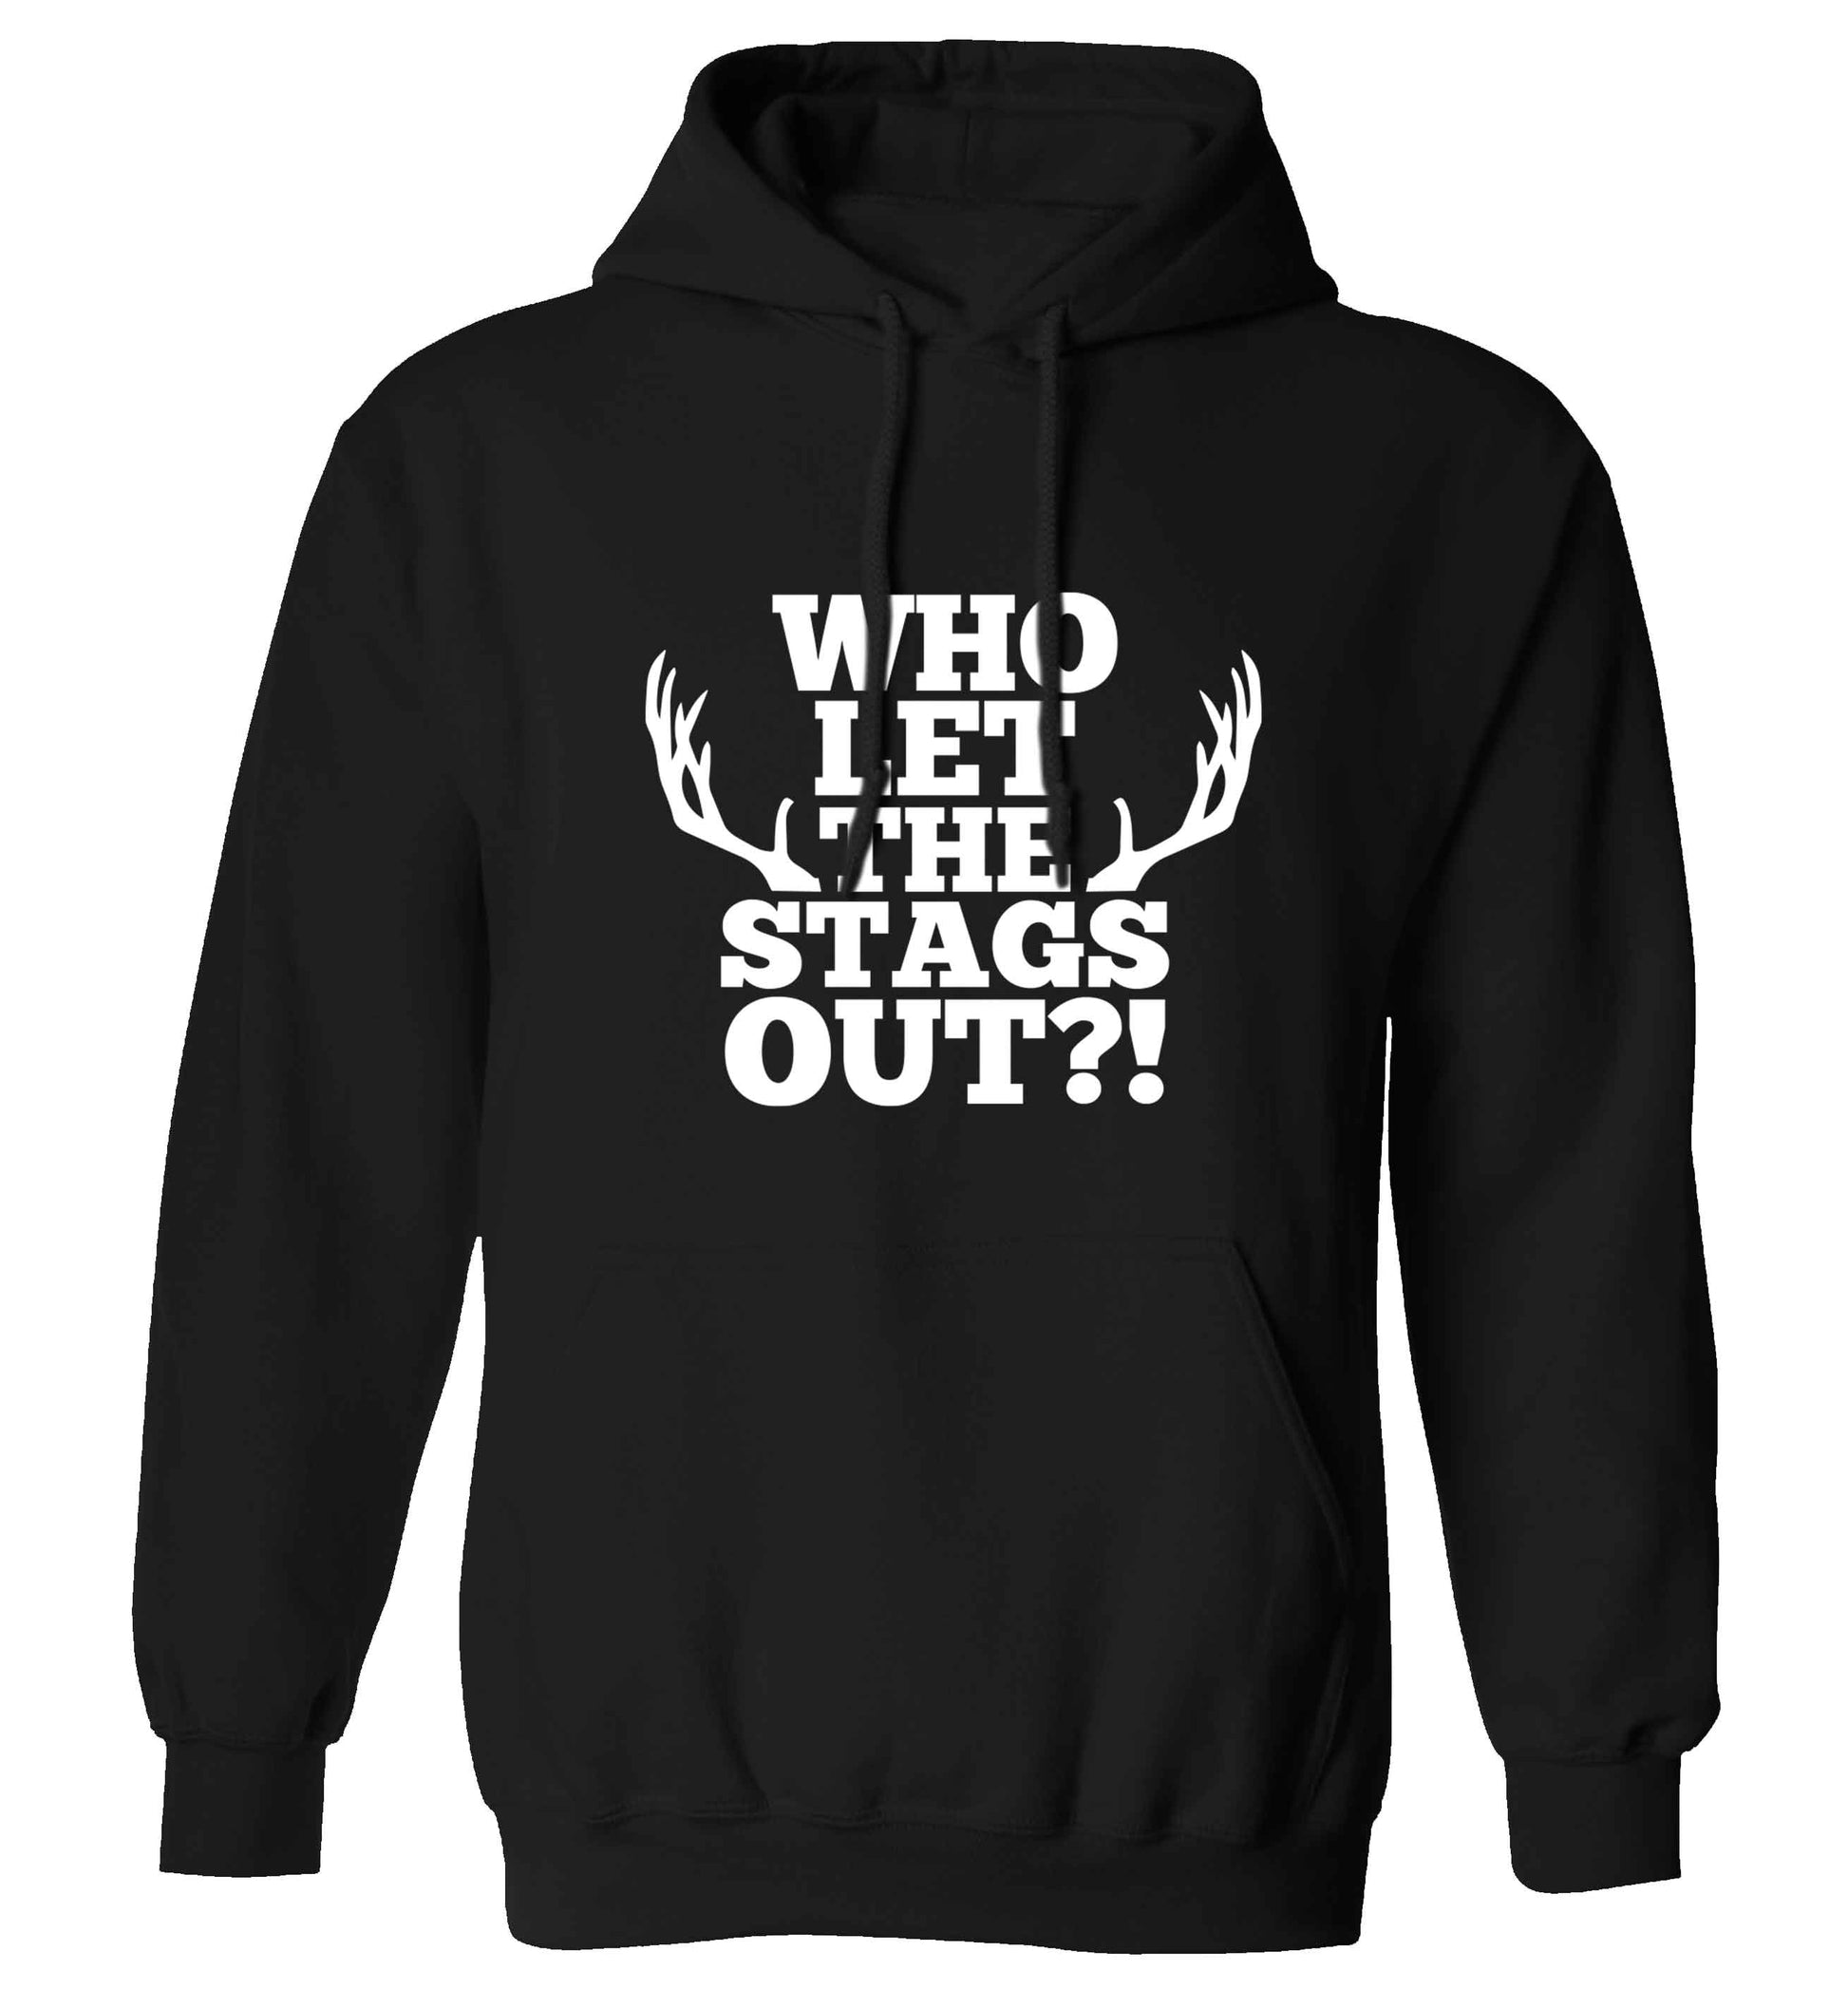 Who let the stags out adults unisex black hoodie 2XL